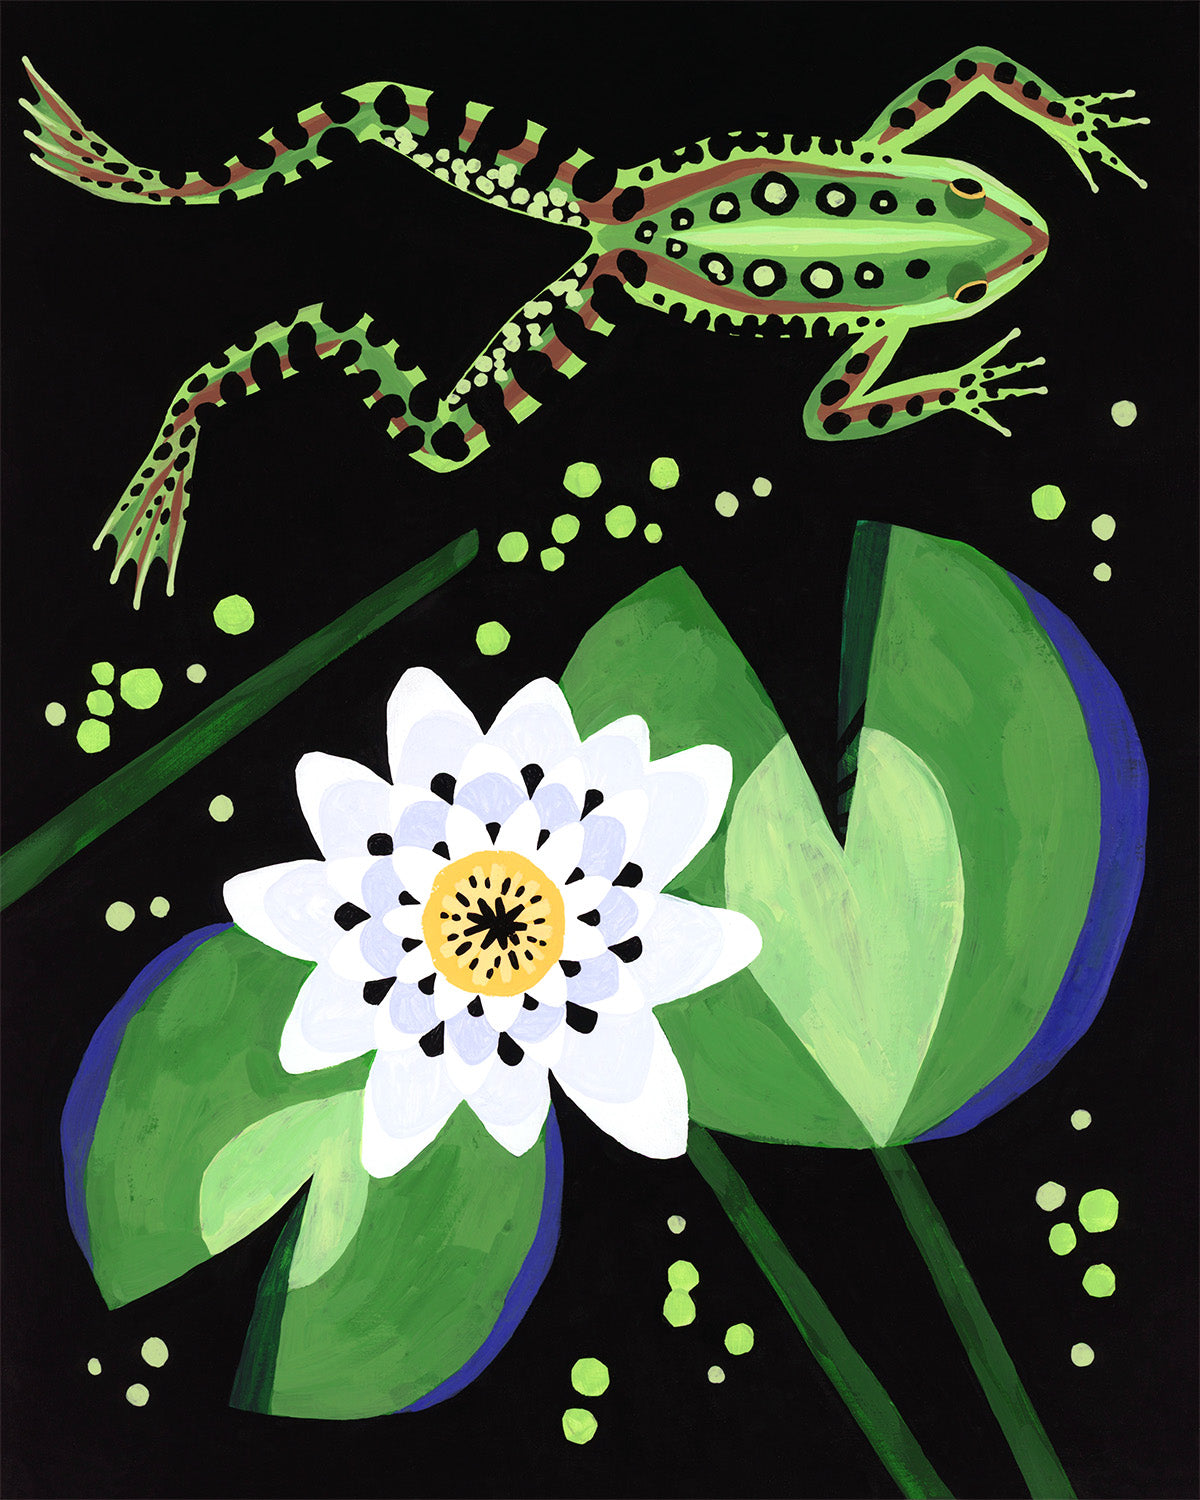 Original painting of a frog with lily pads